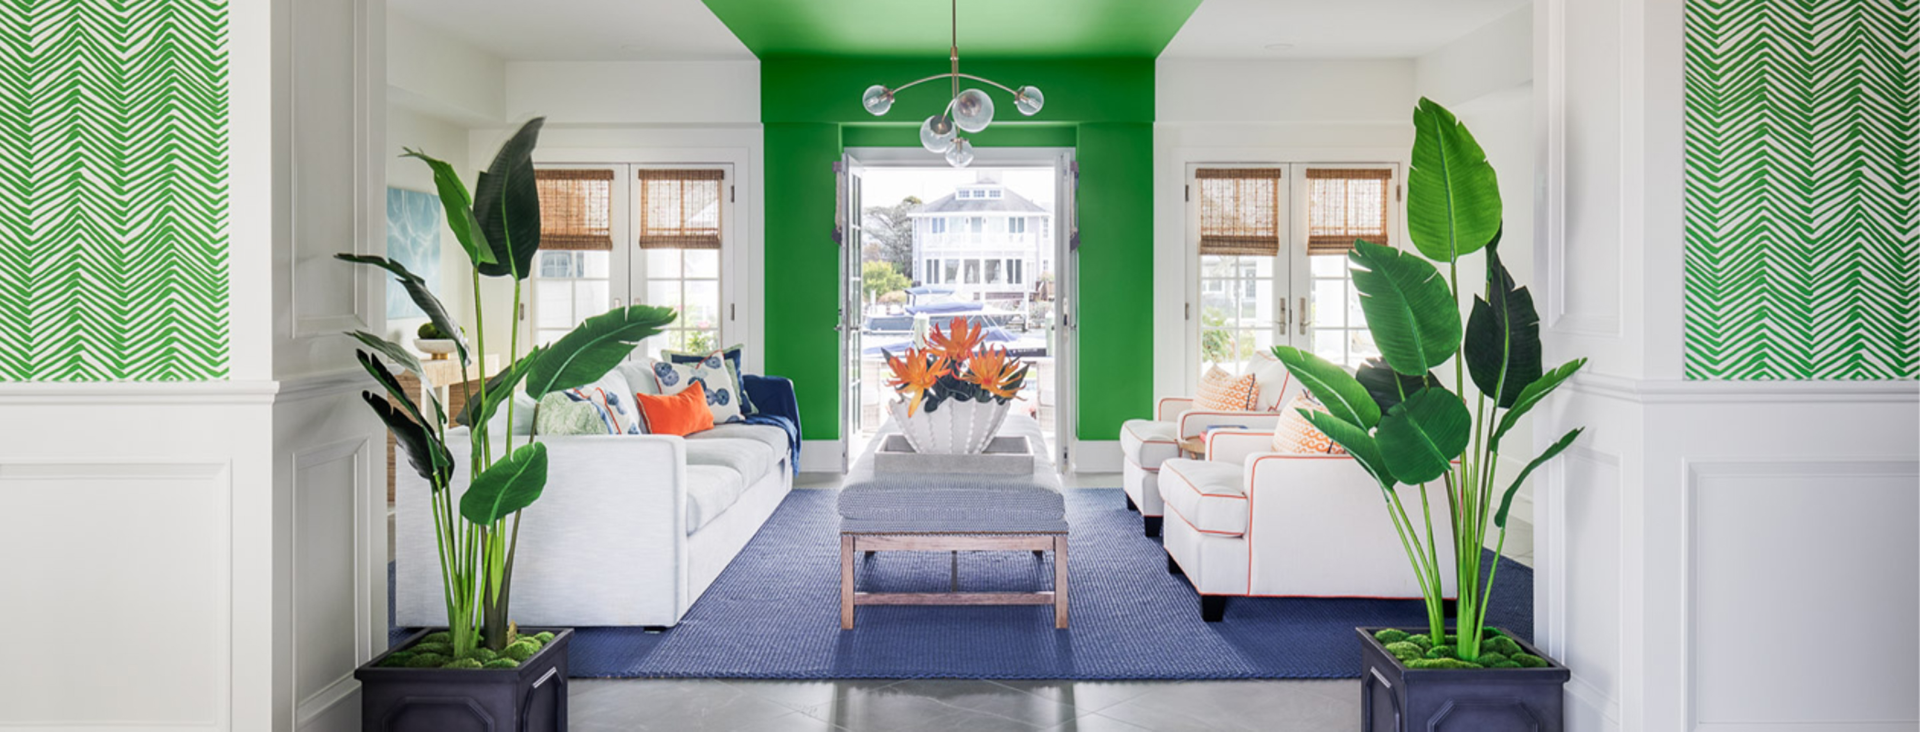 Living room with white sofa and armchairs, blue rug, and white walls and ceiling with bright green painted stripe down the center of the room, twin potted palms in foreground.